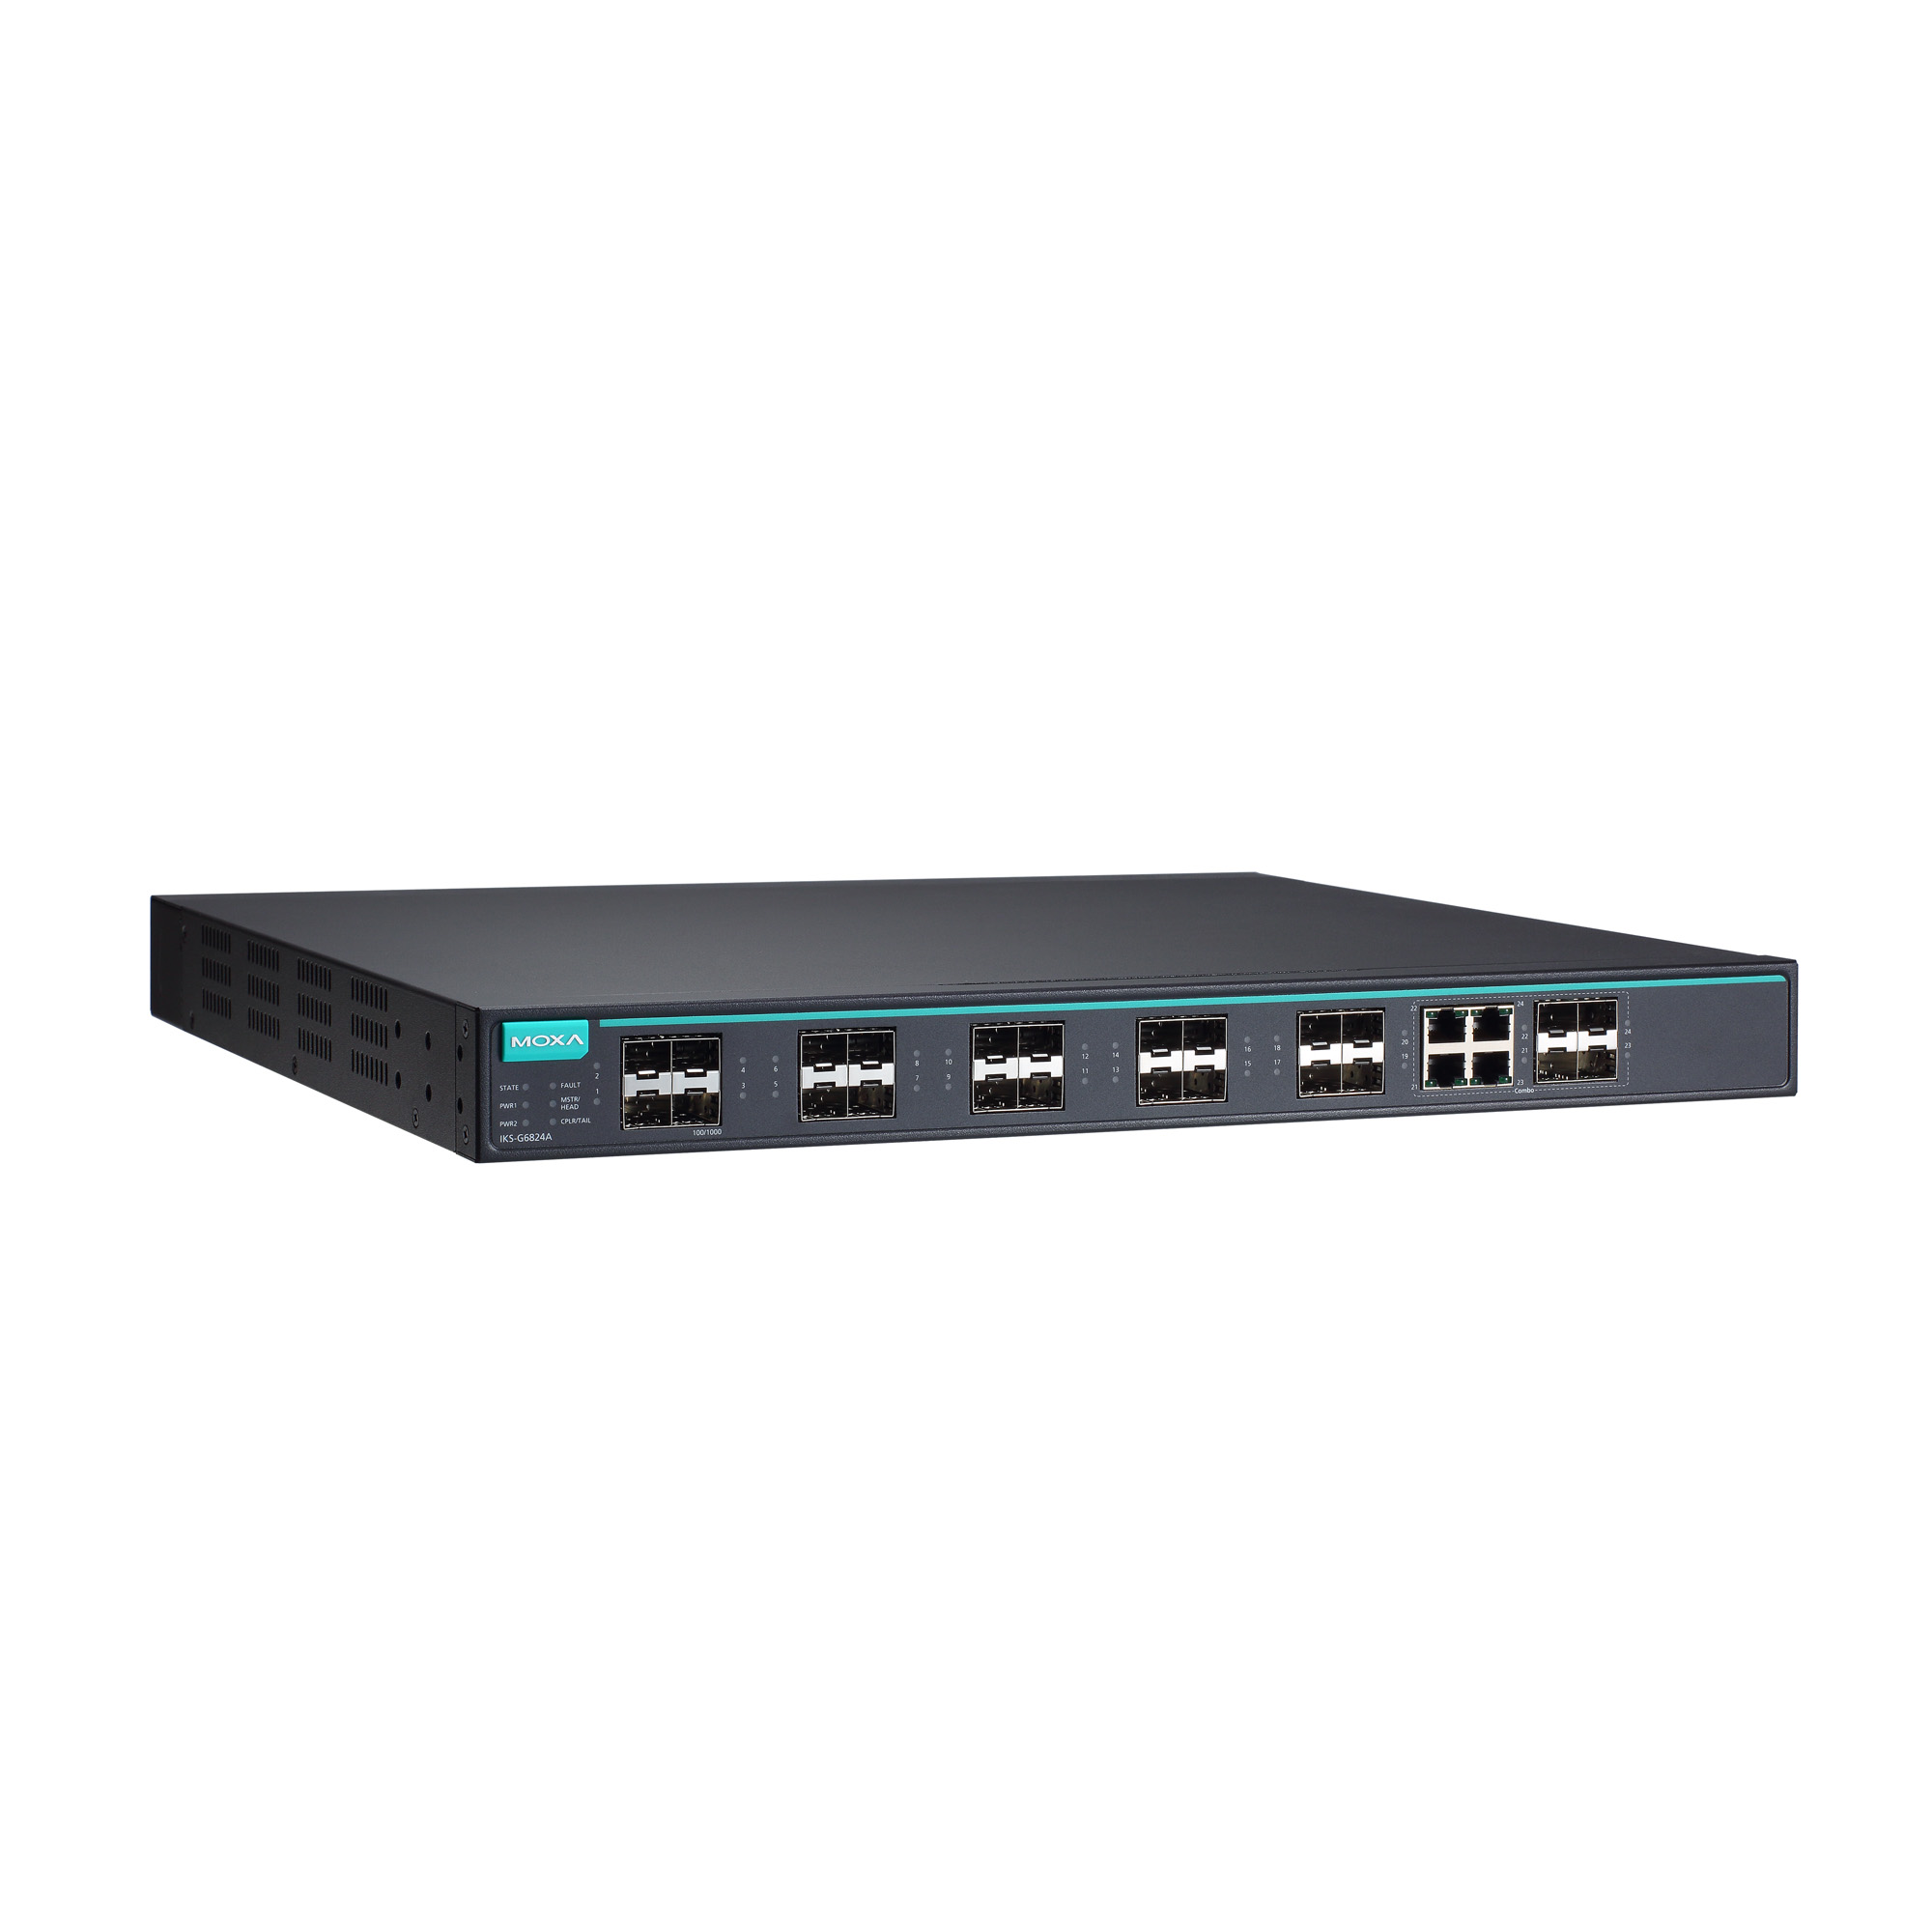 IKS-G6824A Series - Rackmount Switches | MOXA